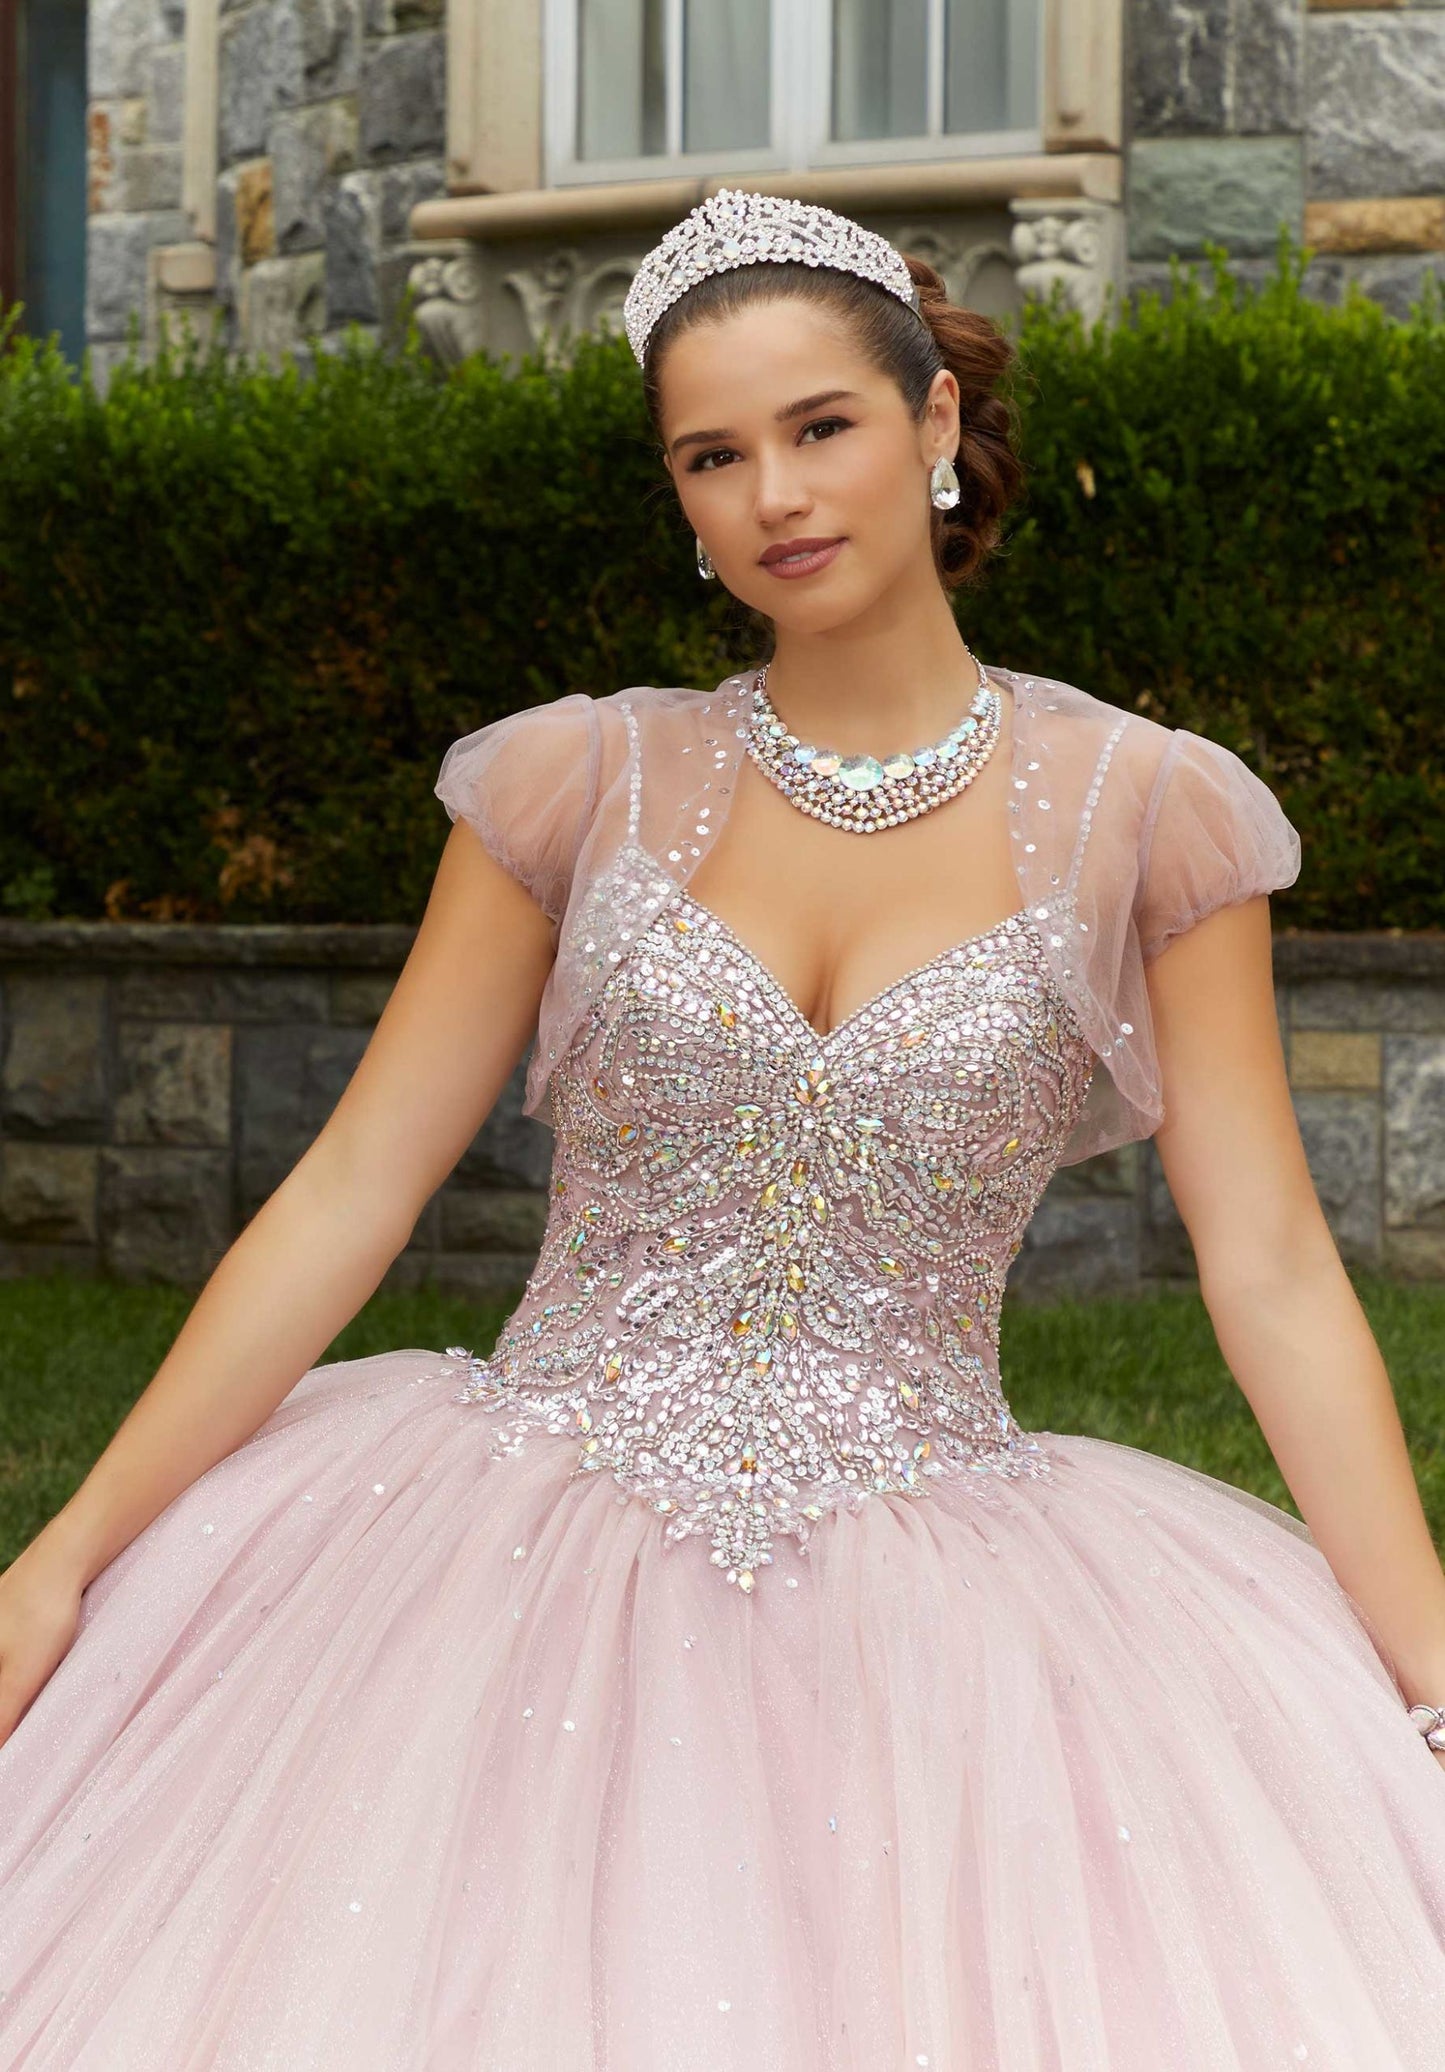 Rhinestone and Crystal Beaded Quinceañera Dress with Bow#60175